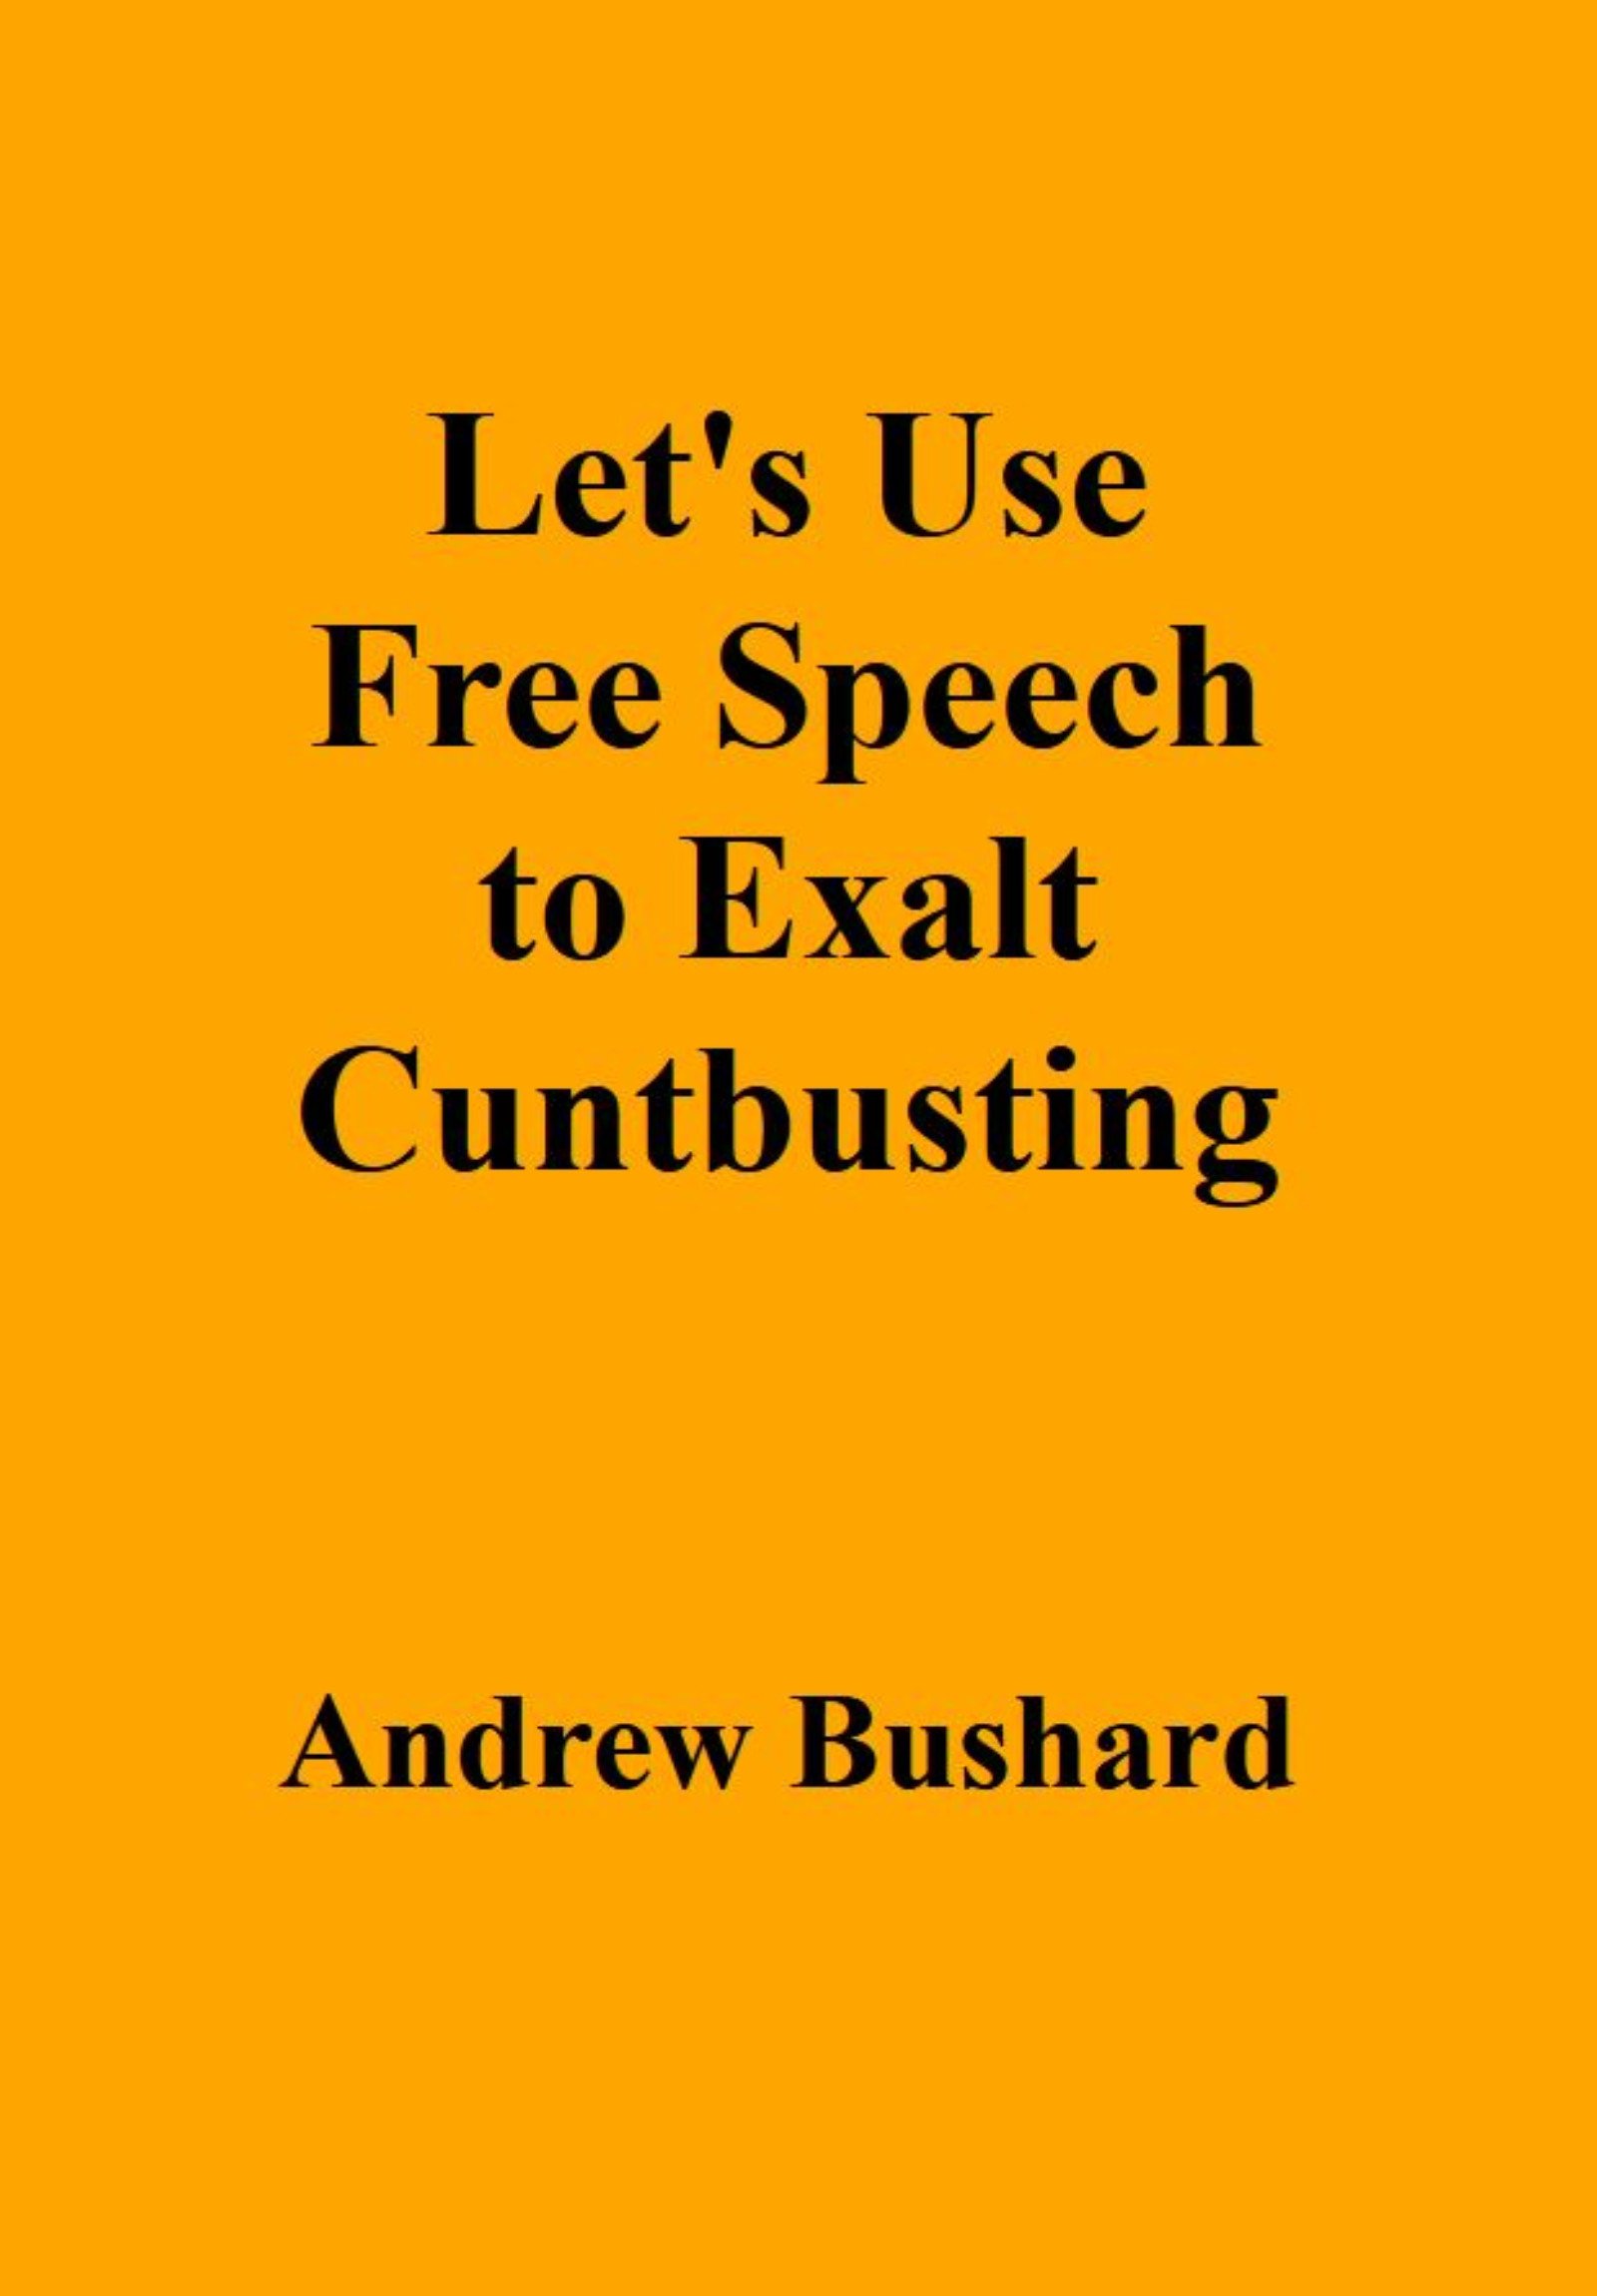 Let's Use Free Speech to Exalt Cuntbusting